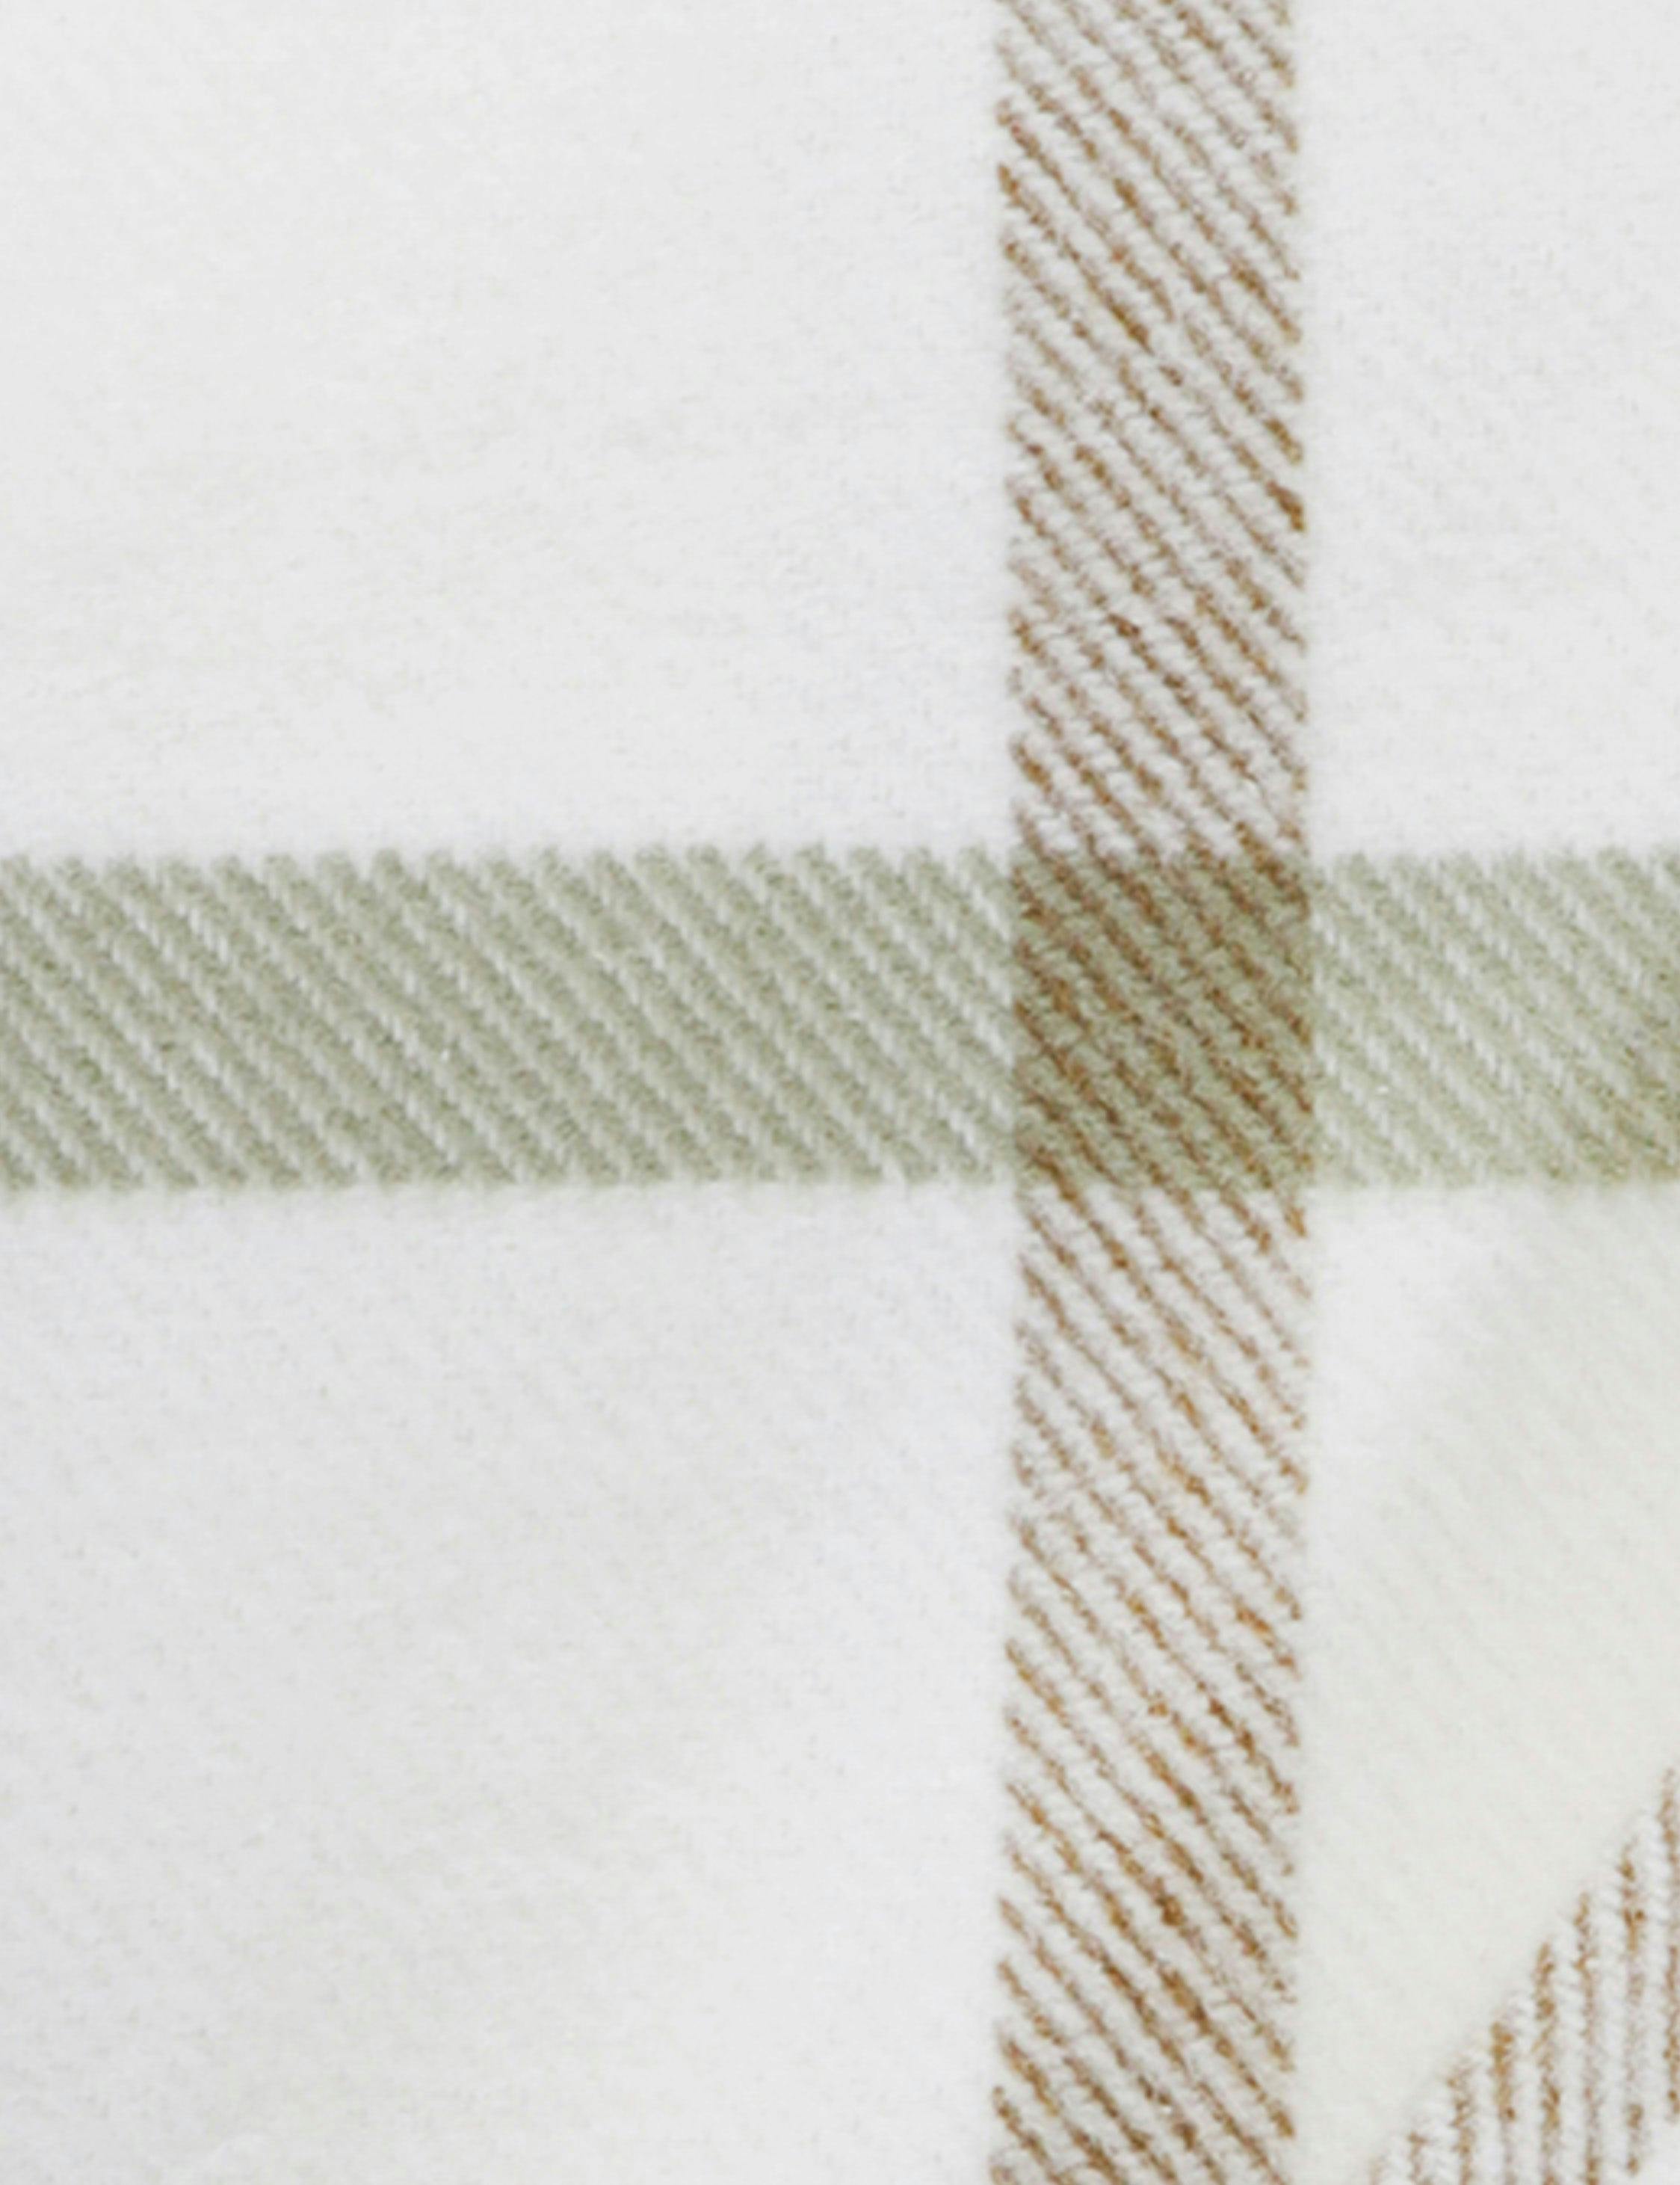 Copenhagen Lightweight Brushed Cotton Throw - White and Olive